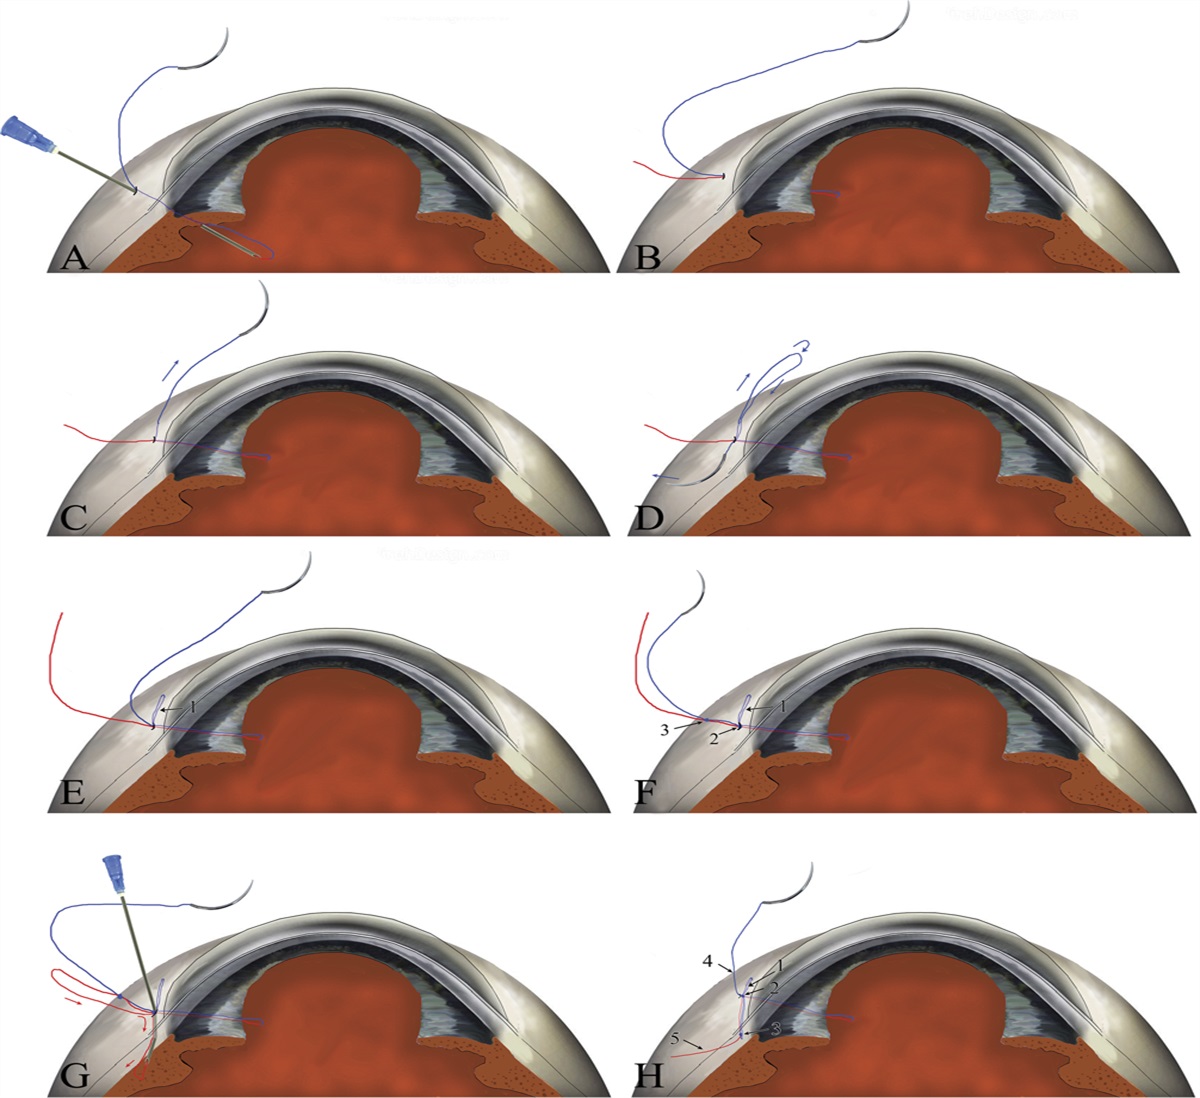 Flapless Intrascleral Knotting Technique for Suture Fixation of Intraocular Implants